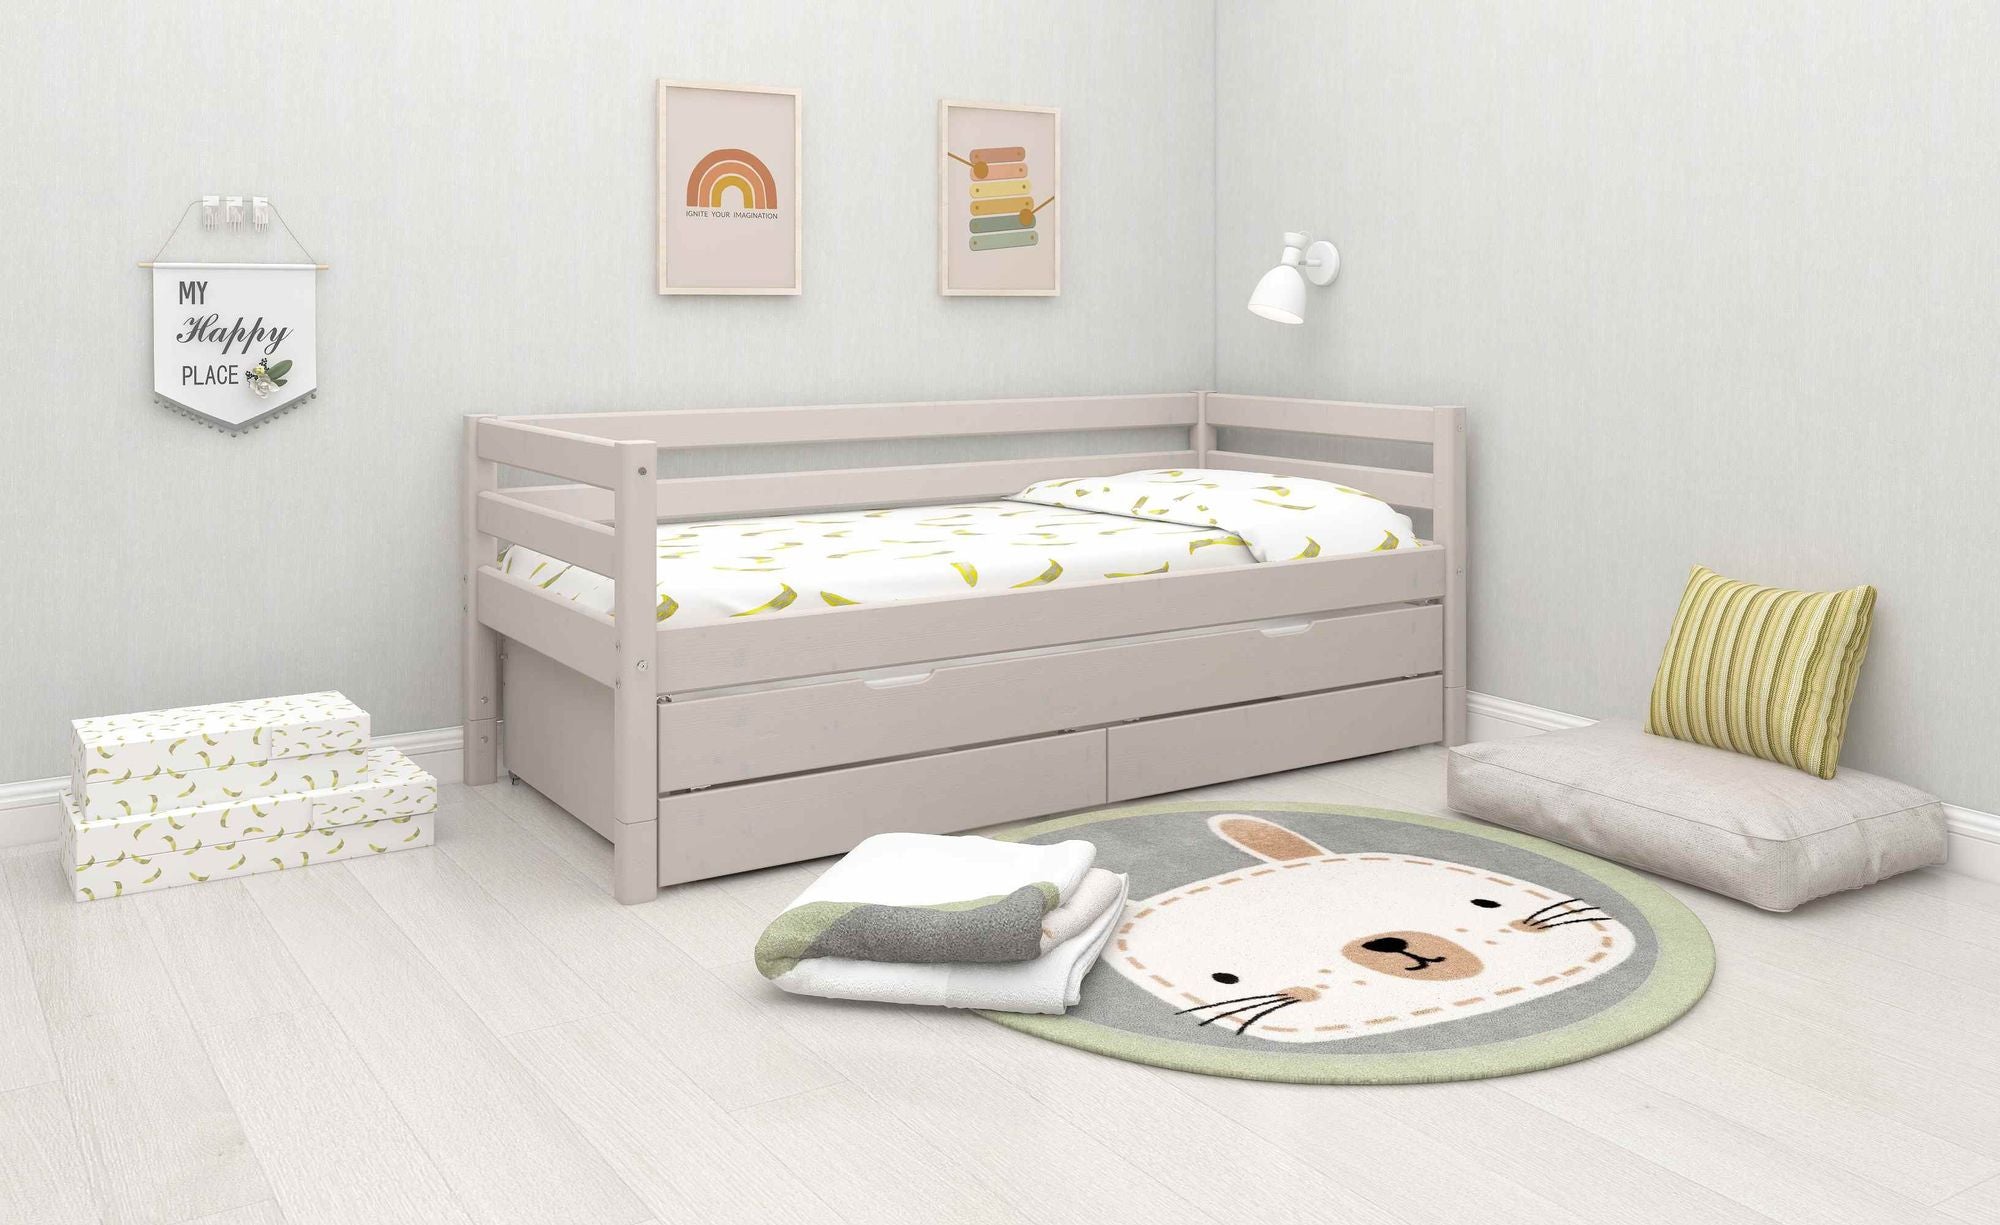 FLEXA Single bed with trundle pullout bed